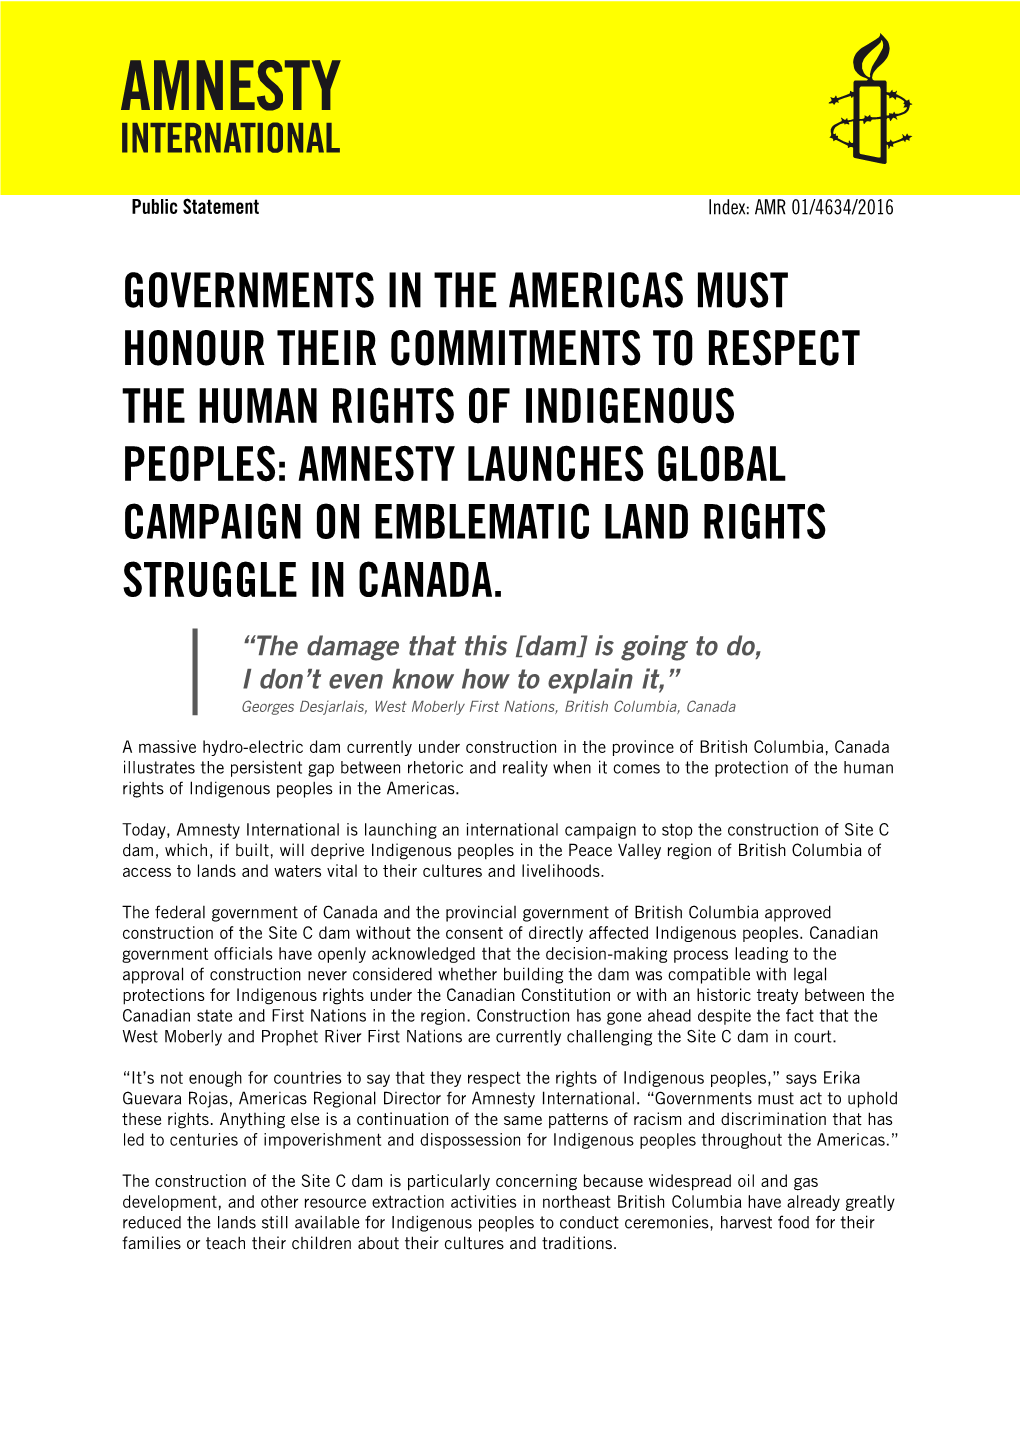 Governments in the Americas Must Honour Their